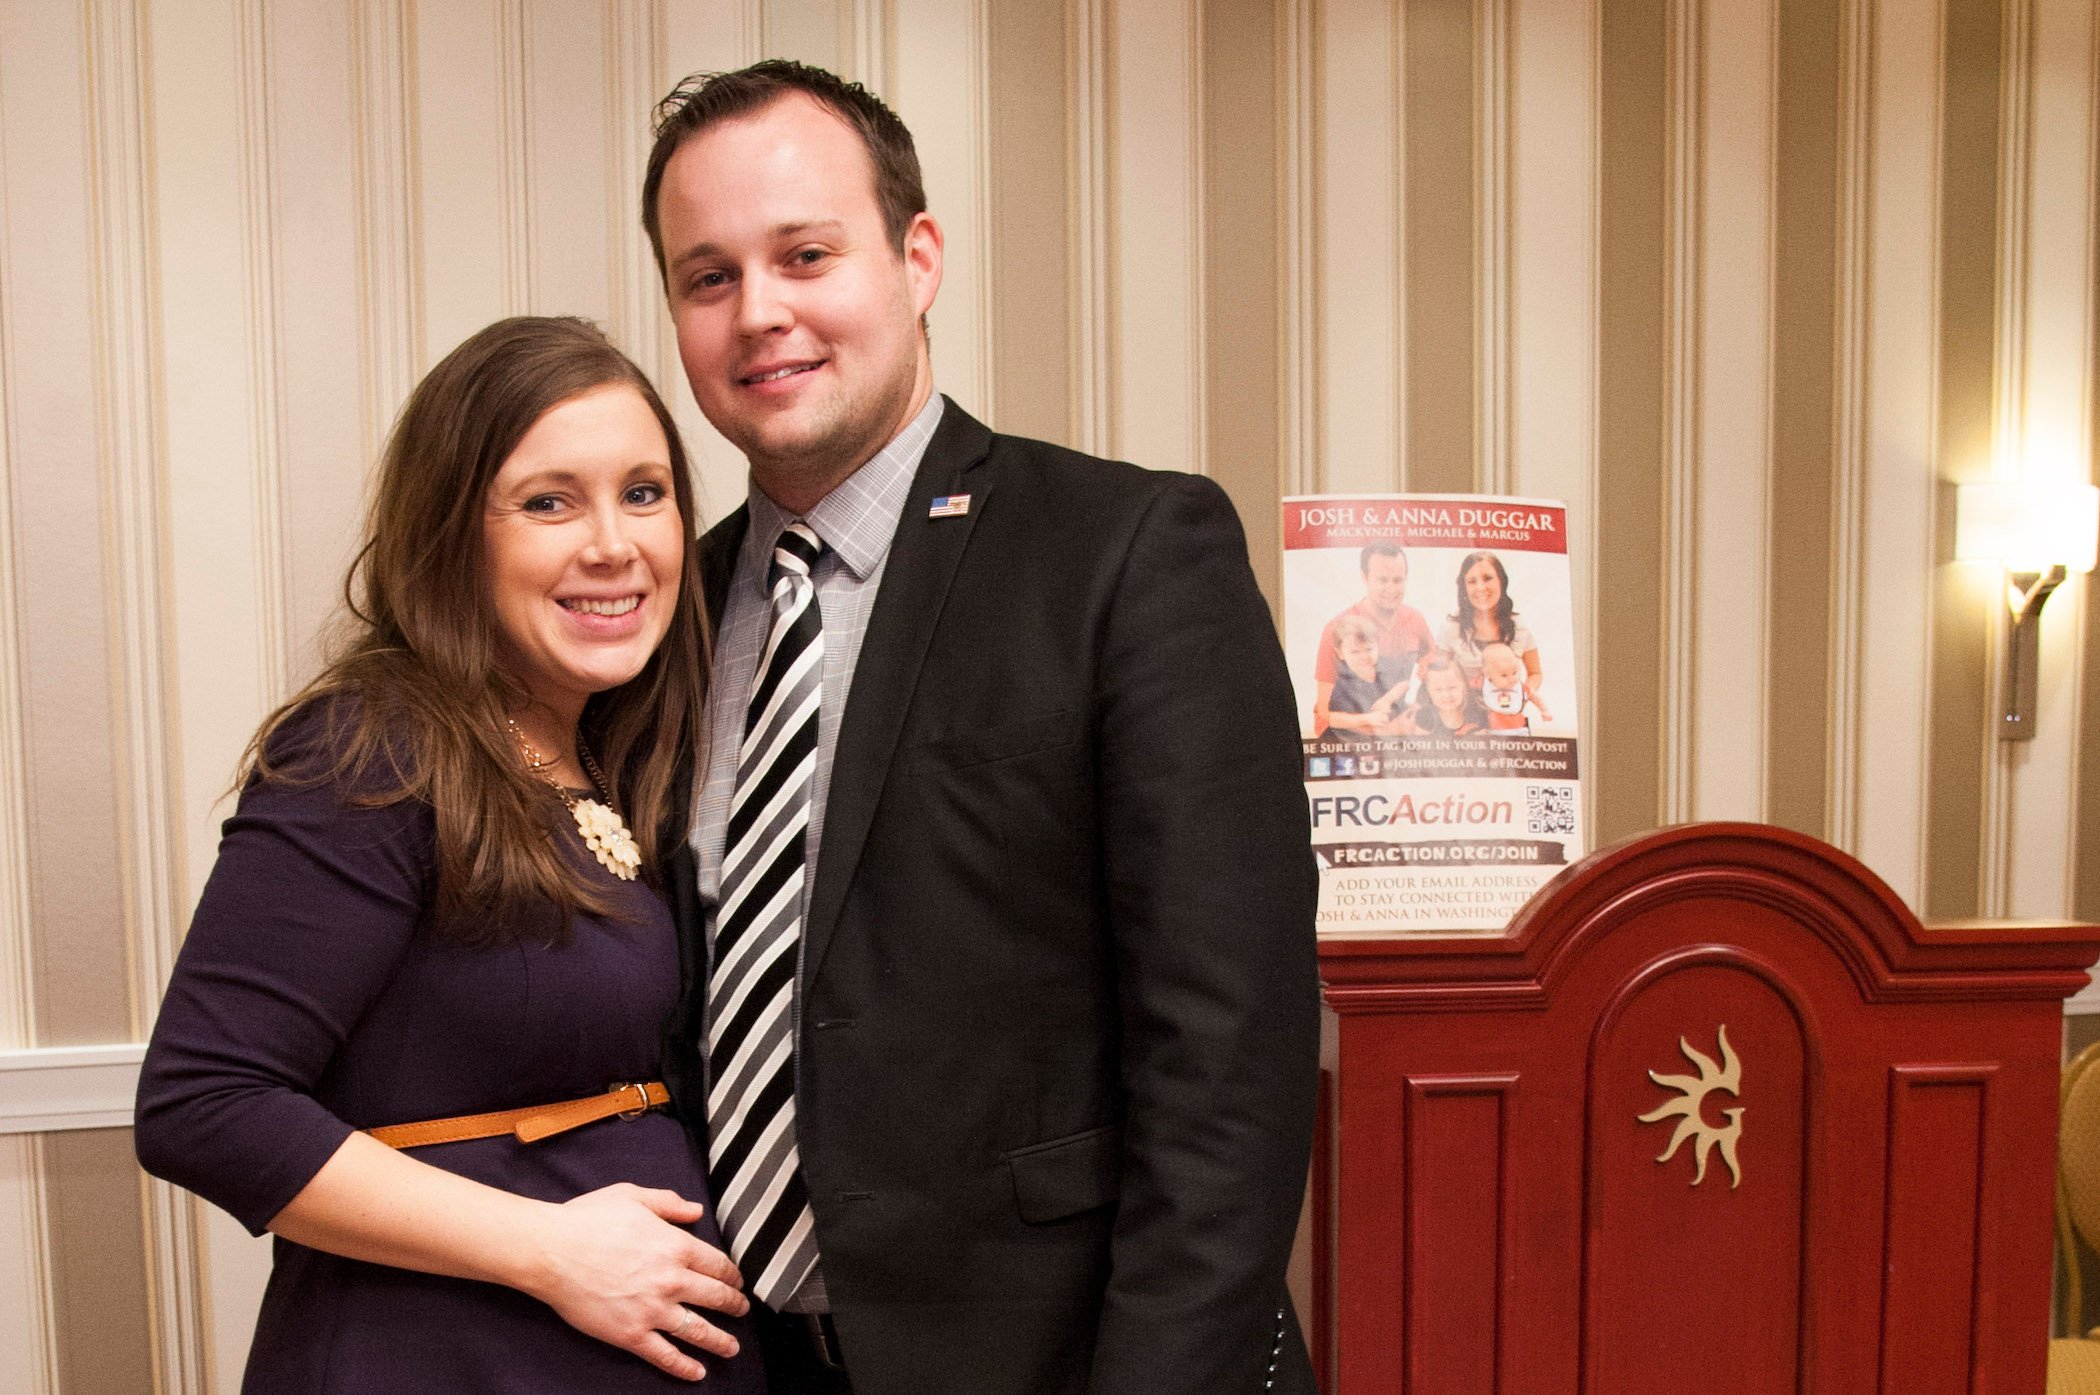 Anna Duggar and Josh Duggar smiling and posing together during a convention. Duggar family critics wonder what will happen with Anna if Josh is found guilty for alleged crimes.